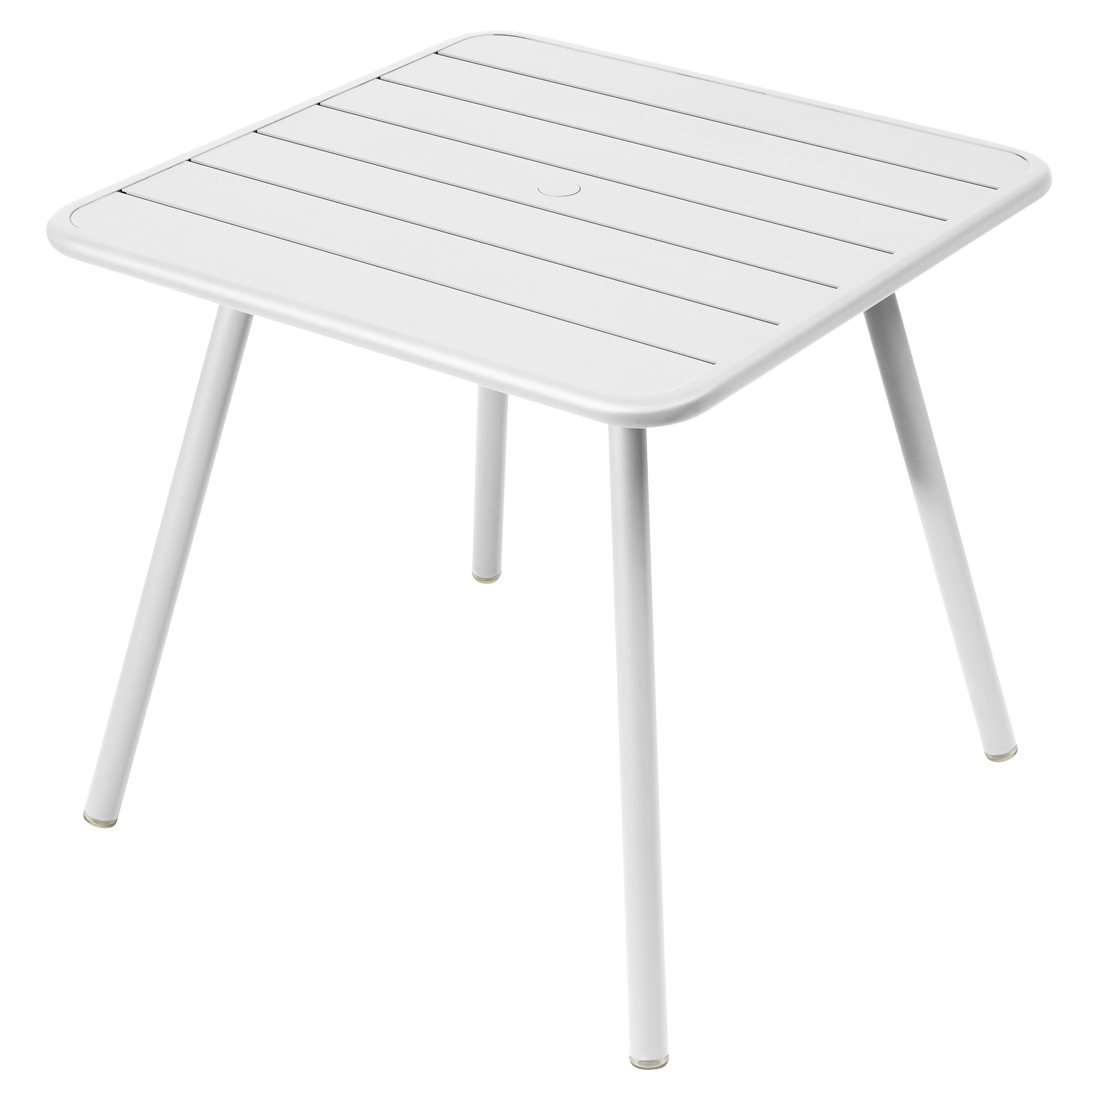 table de jardin, table metal, table 4 places, table blanche, table fermob